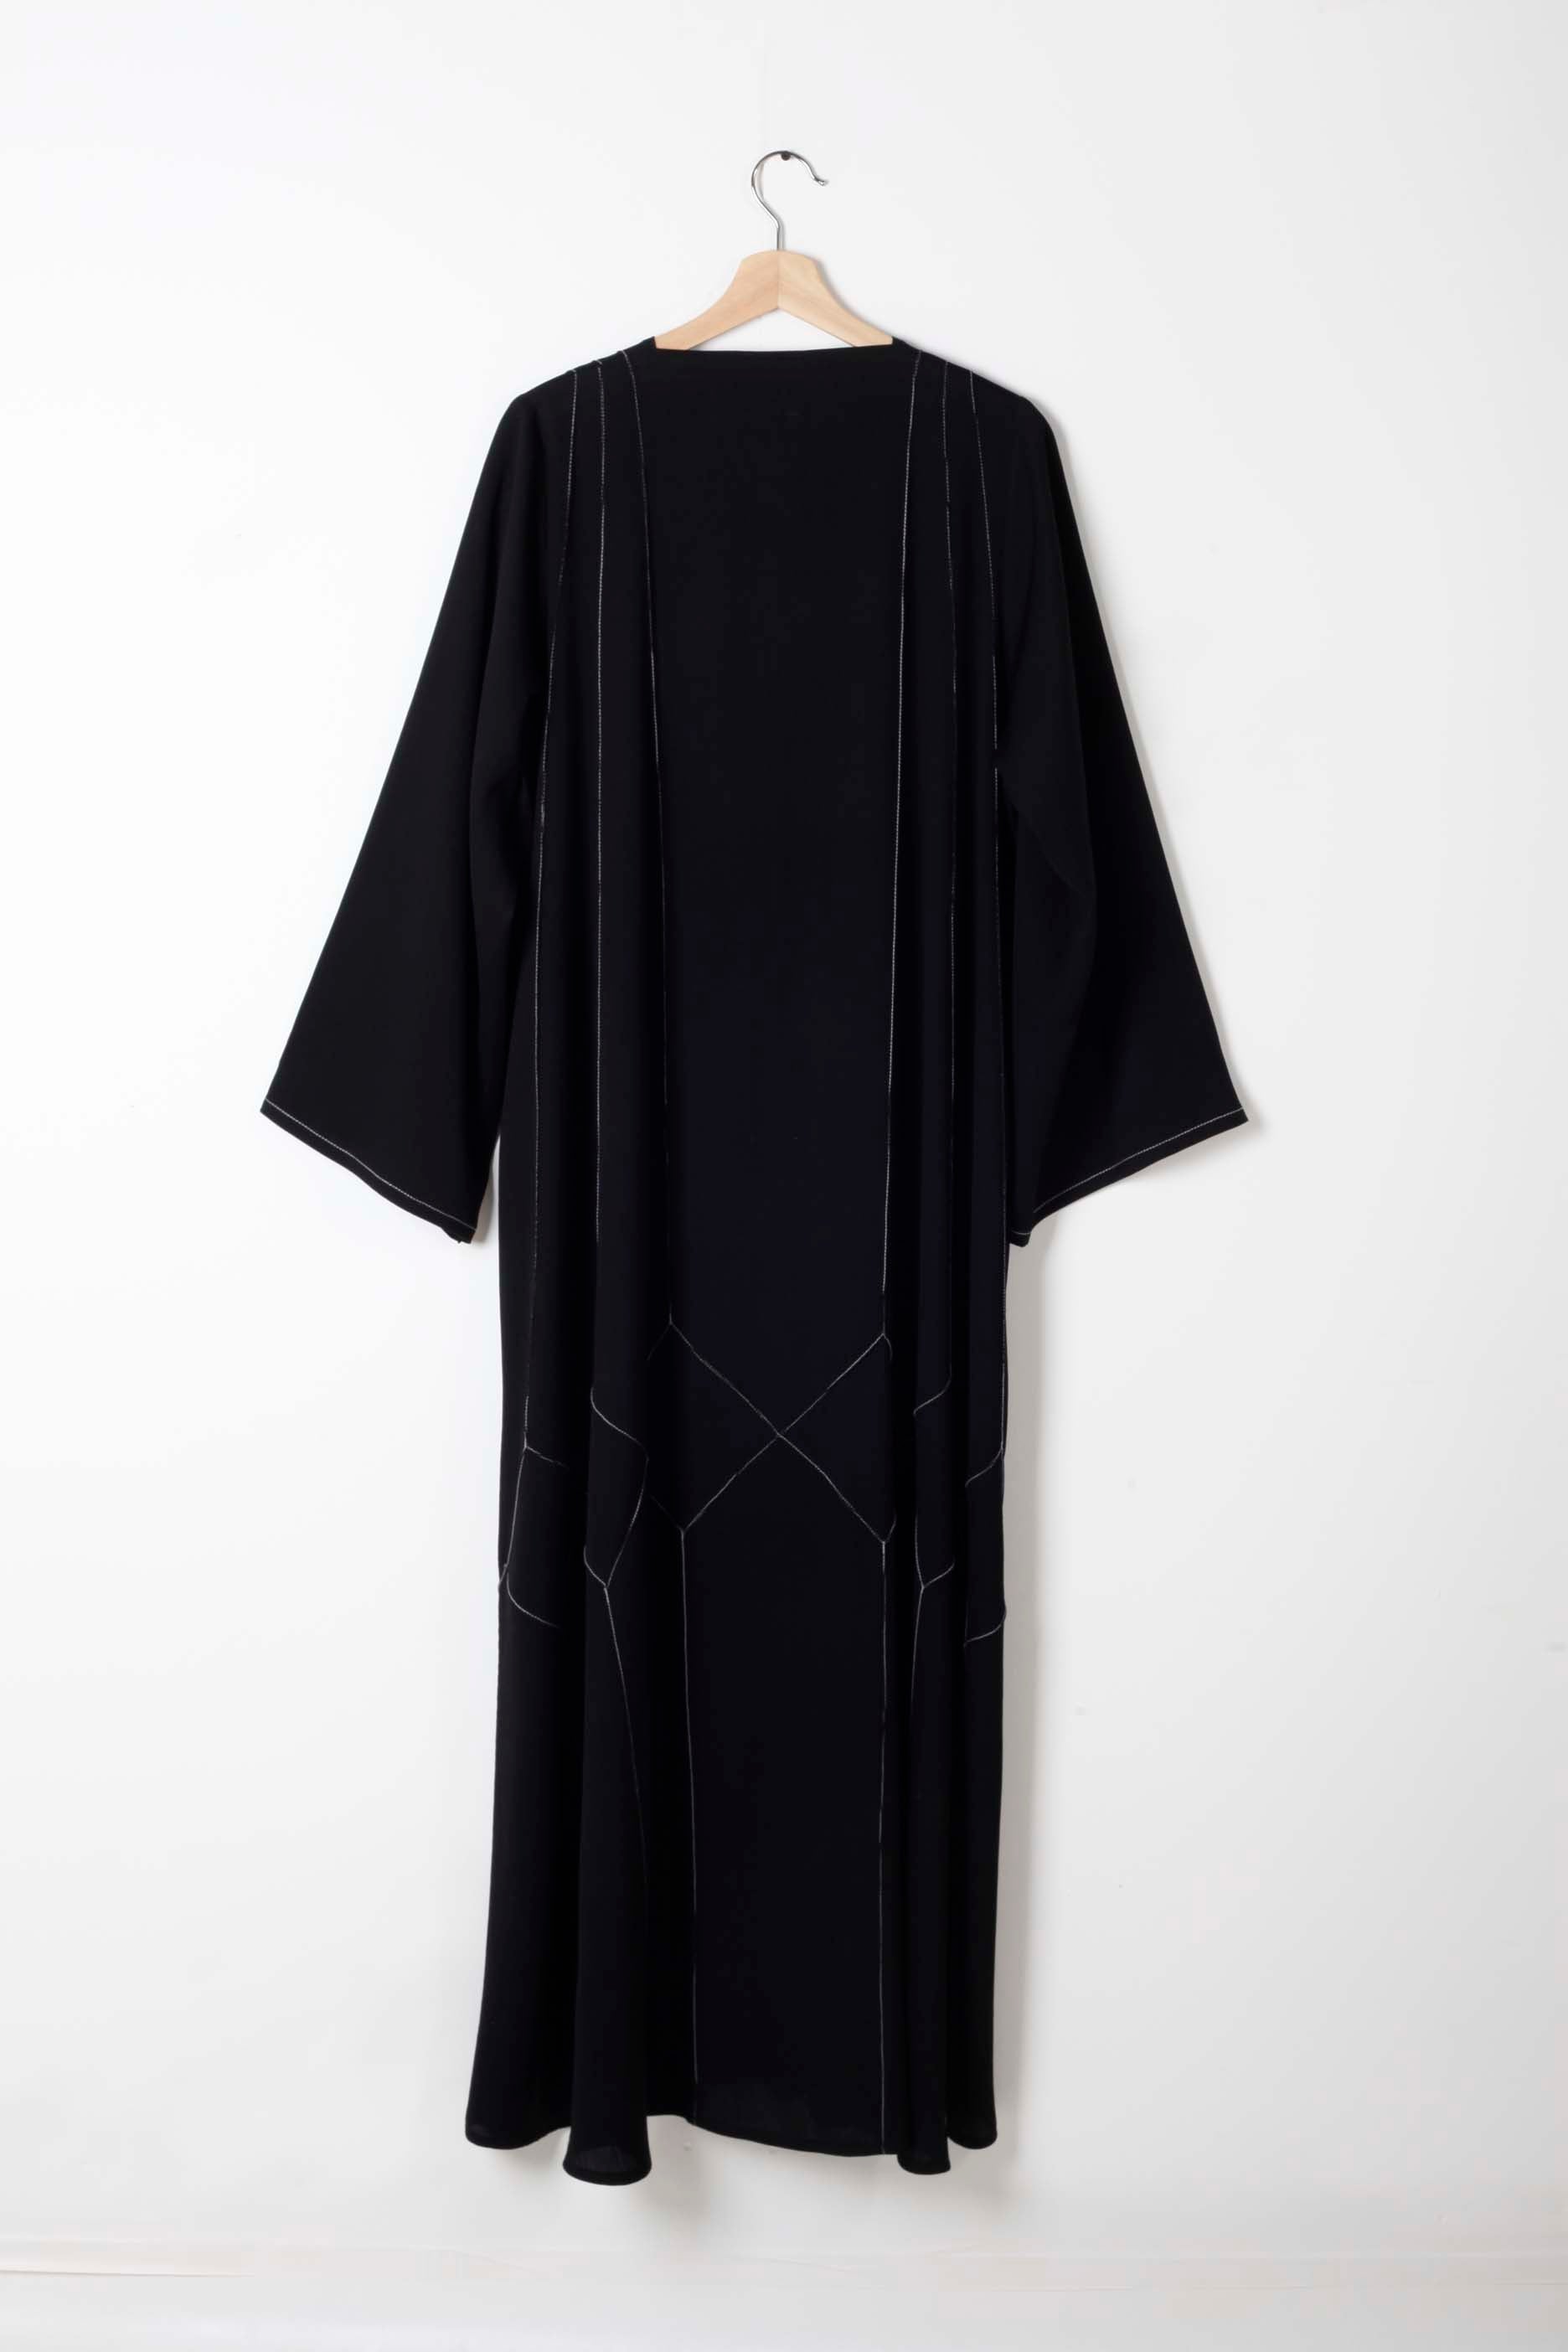 Black Abaya with White Embroidery